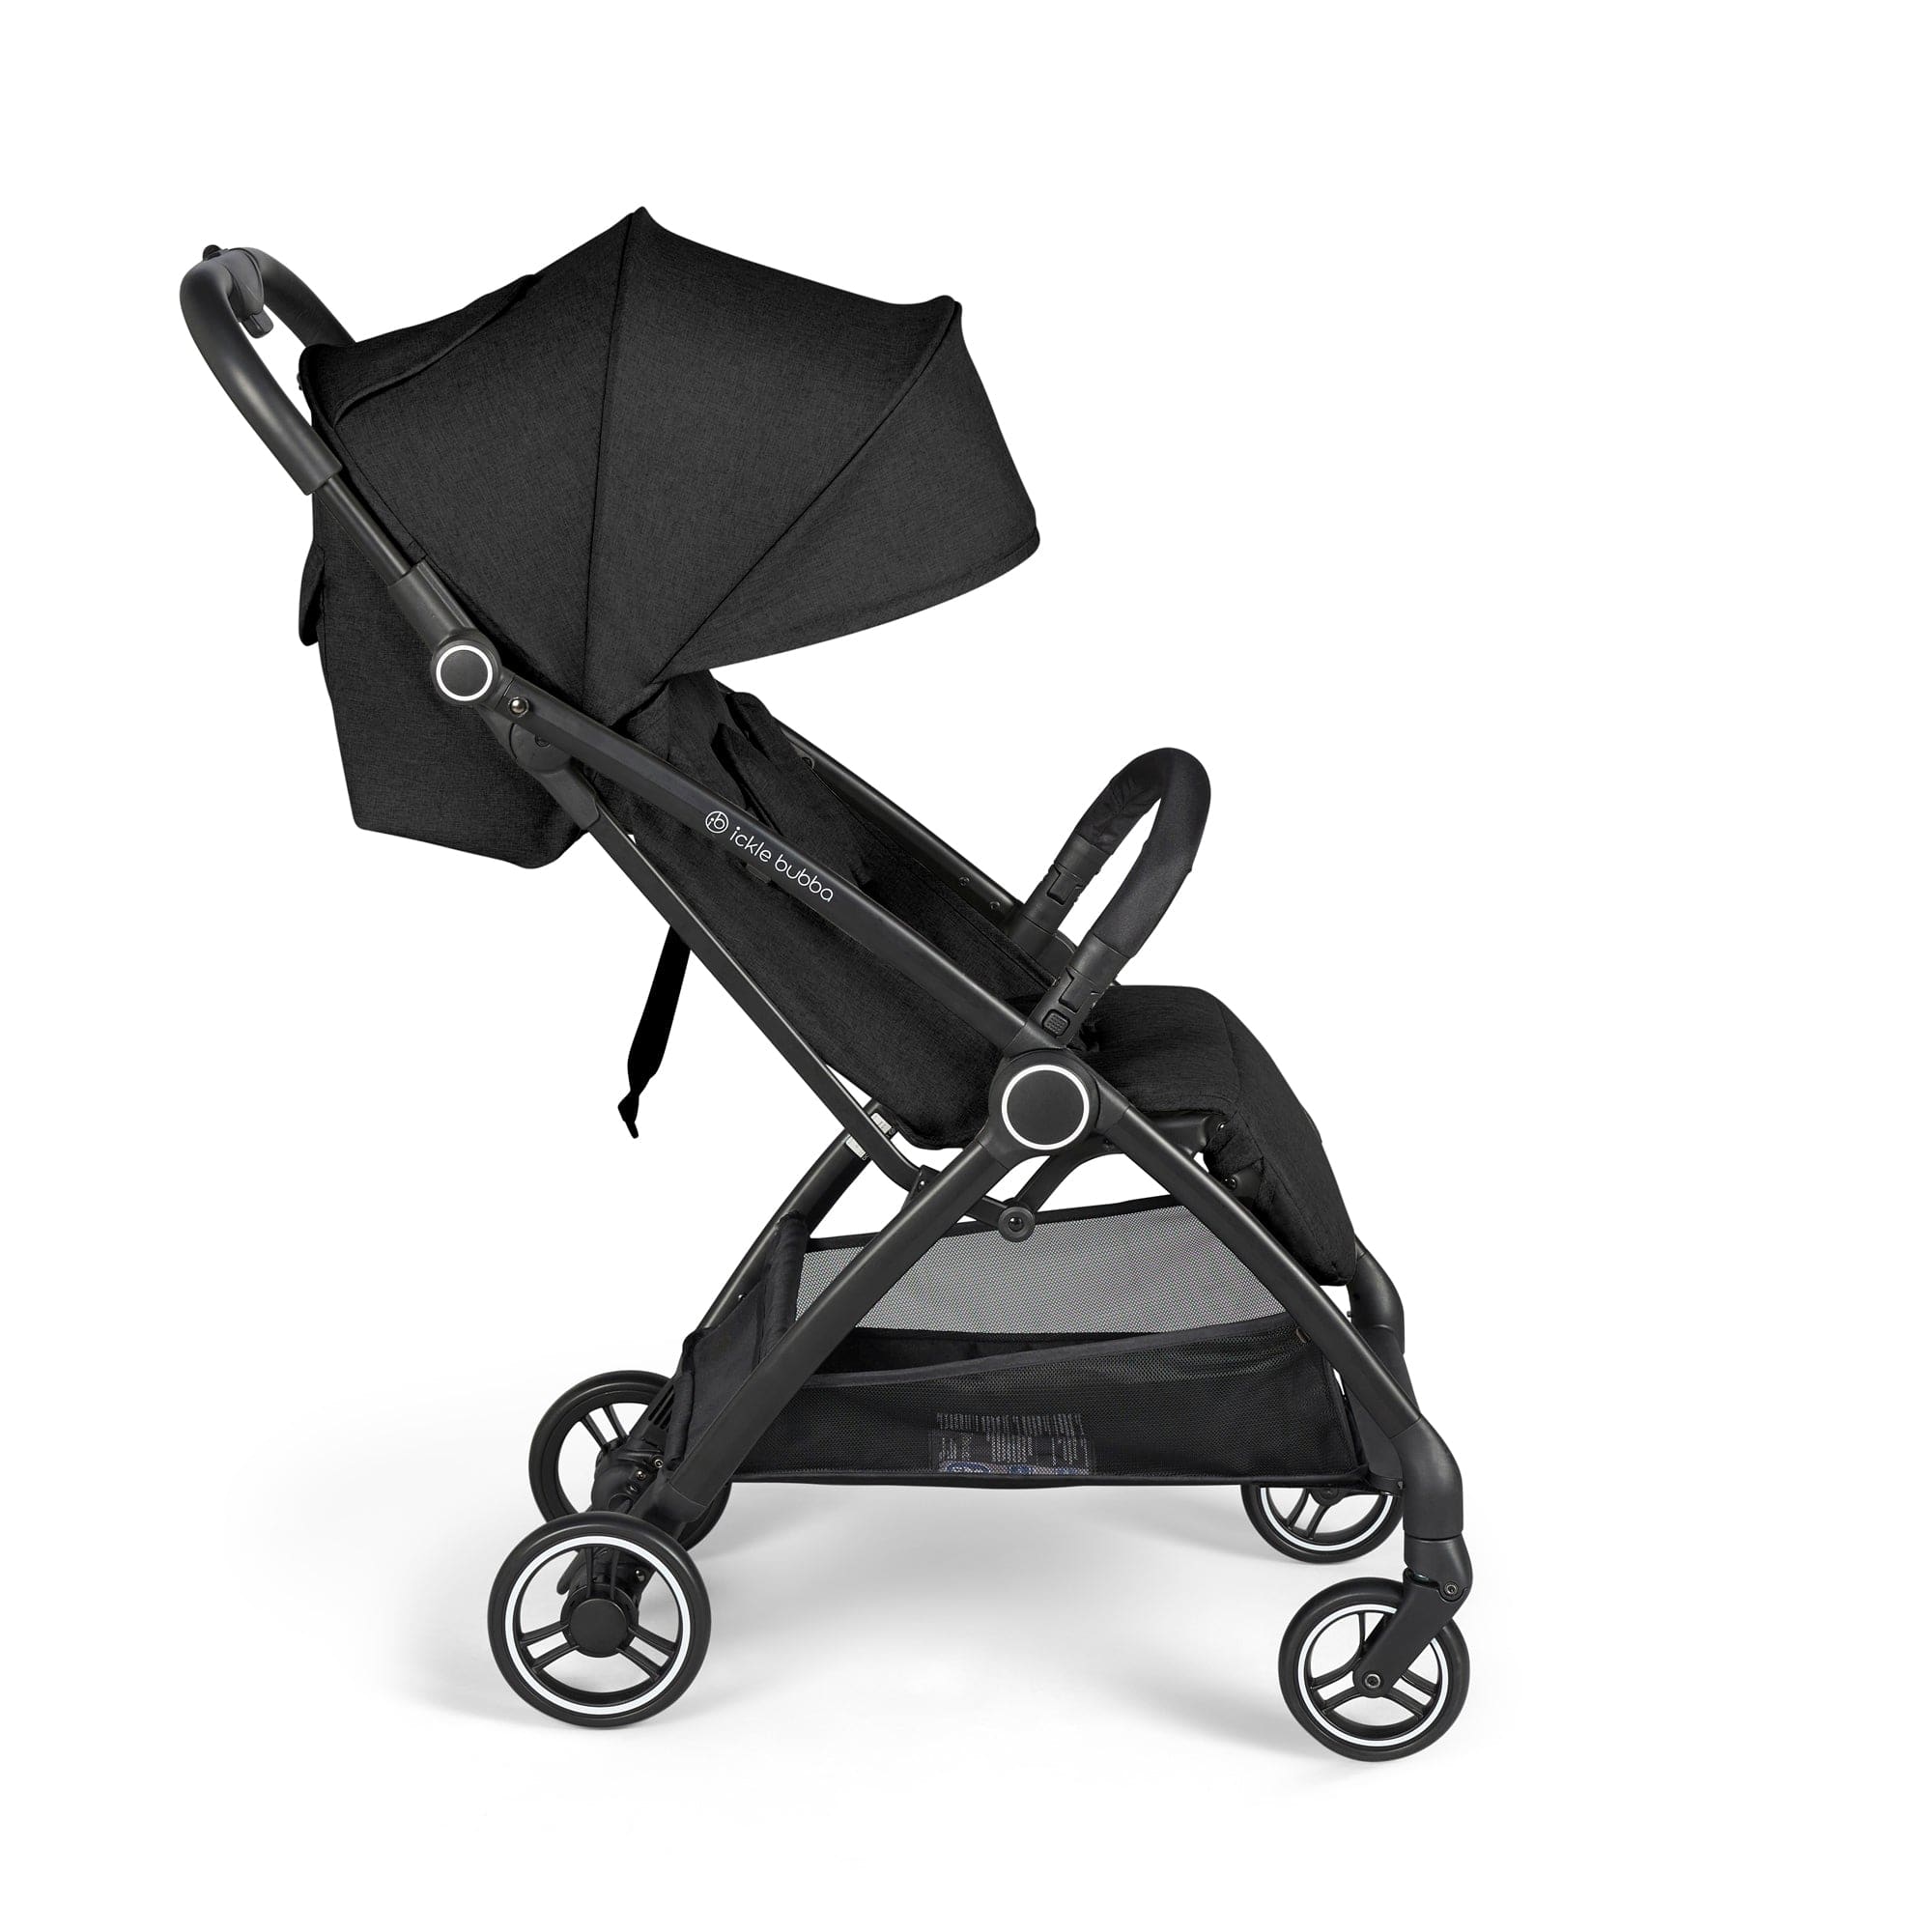 Ickle Bubba baby pushchairs Ickle Bubba Aries Autofold Stroller in Black 15-005-100-001